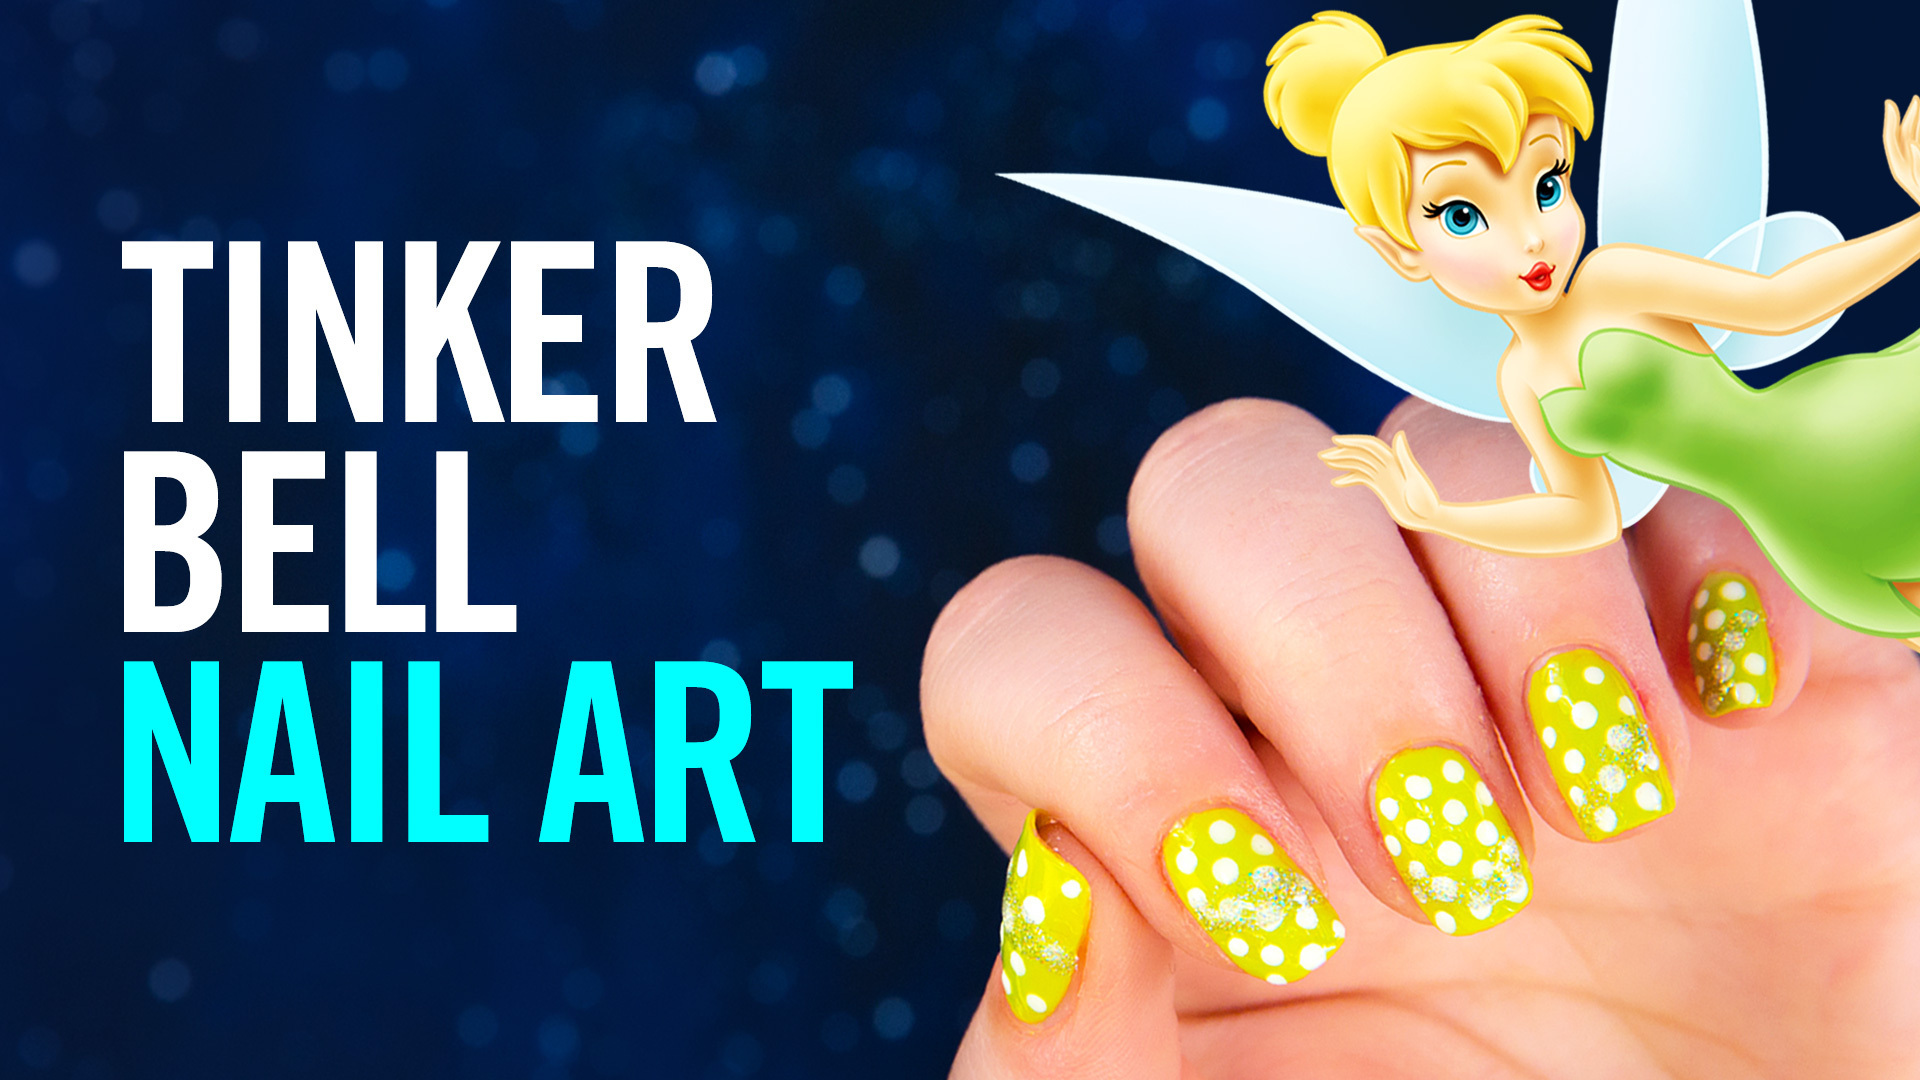 Tinker Bell Backgrounds, Compatible - PC, Mobile, Gadgets| 1920x1080 px